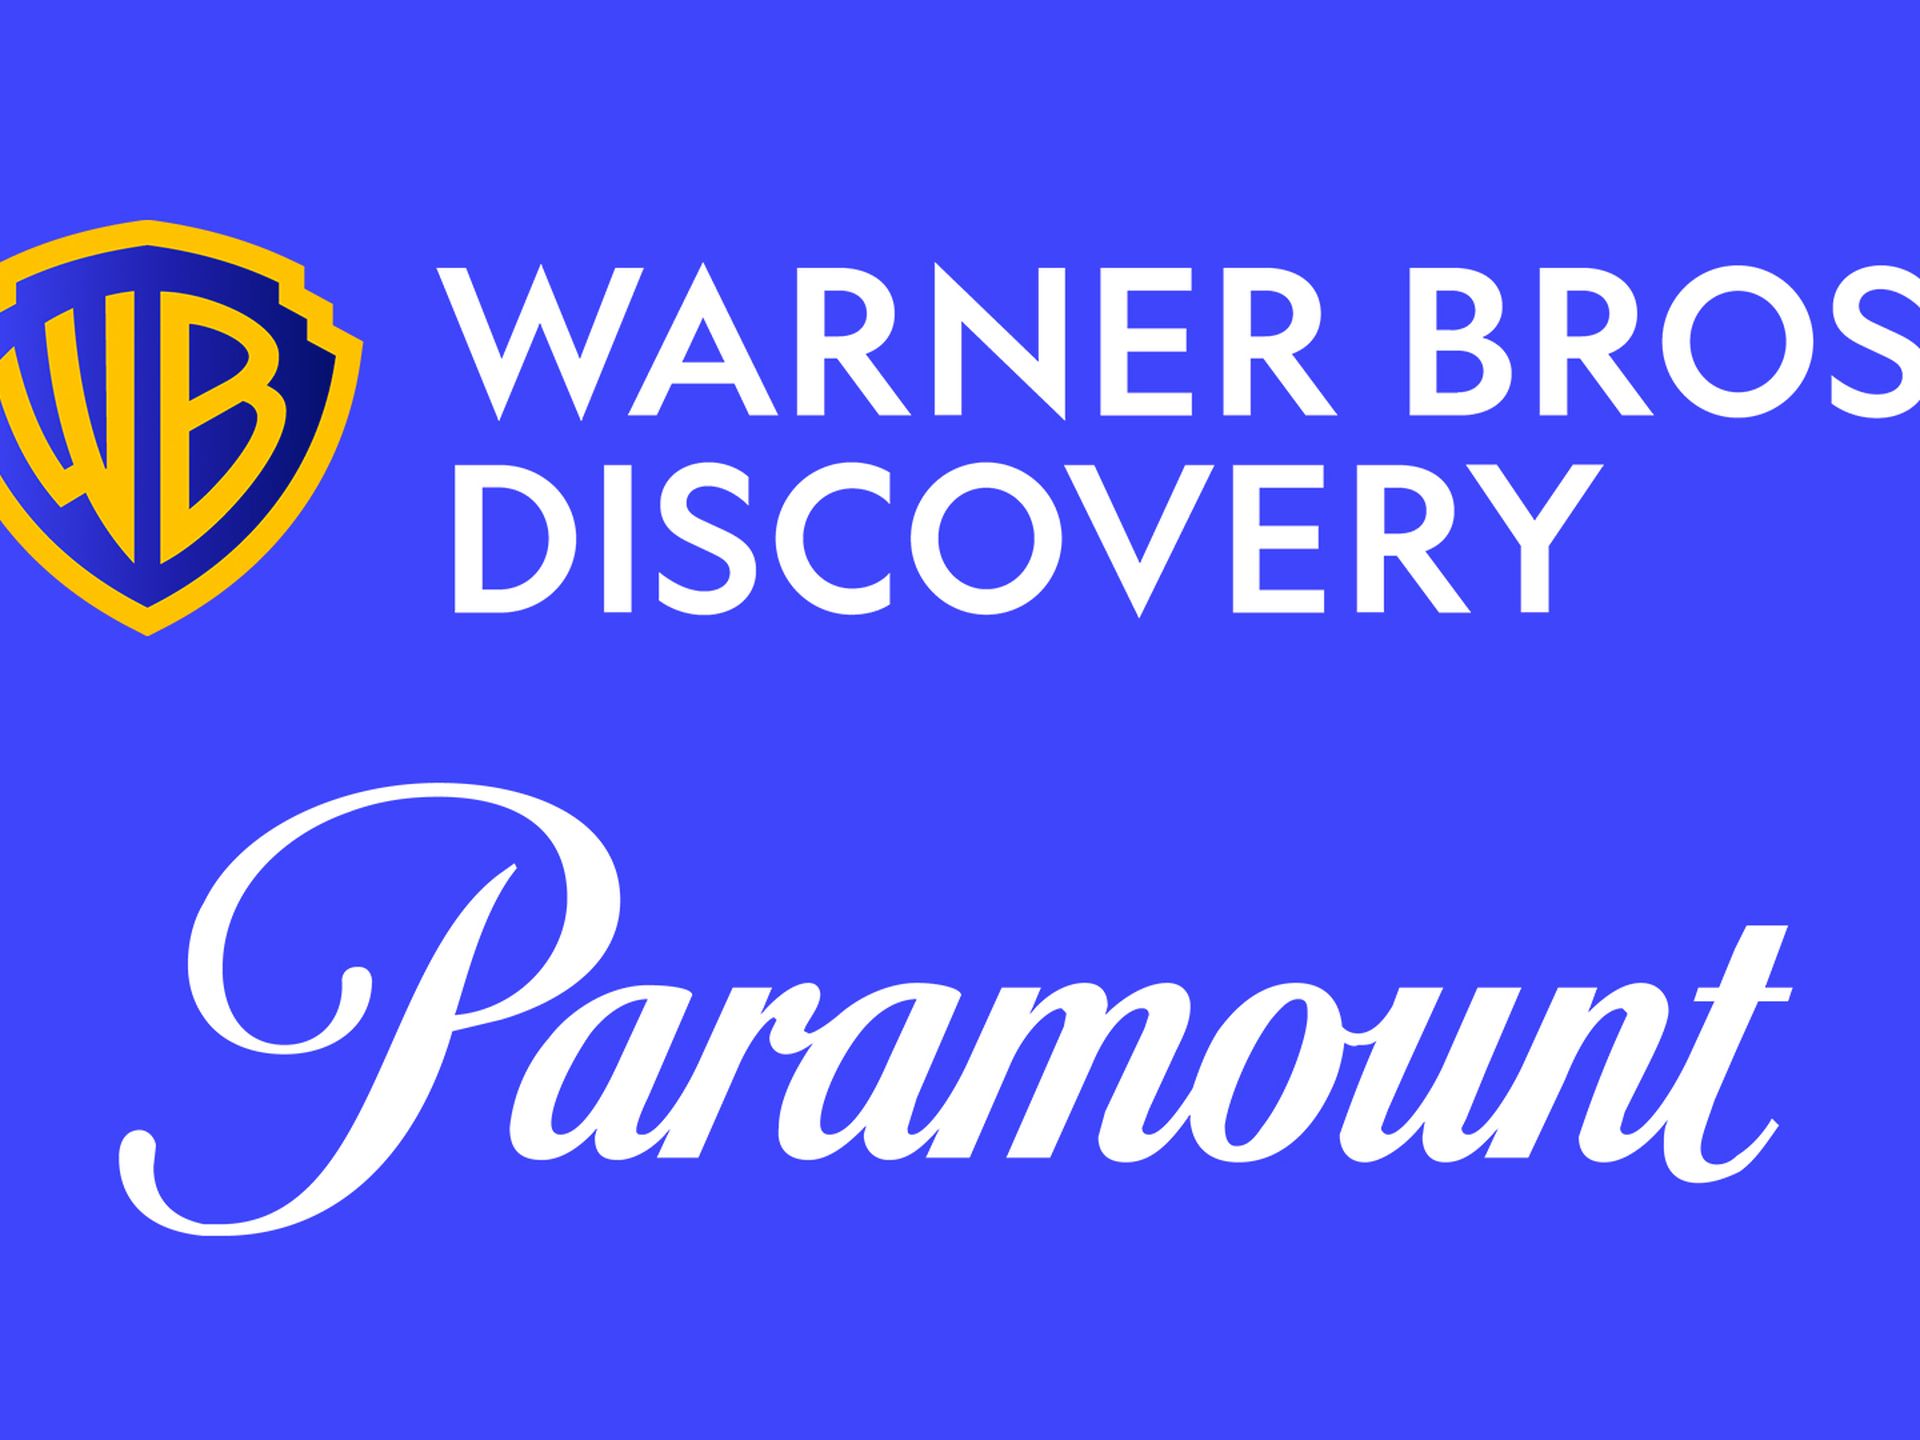 What you need to know about the Warner Bros Discovery merger